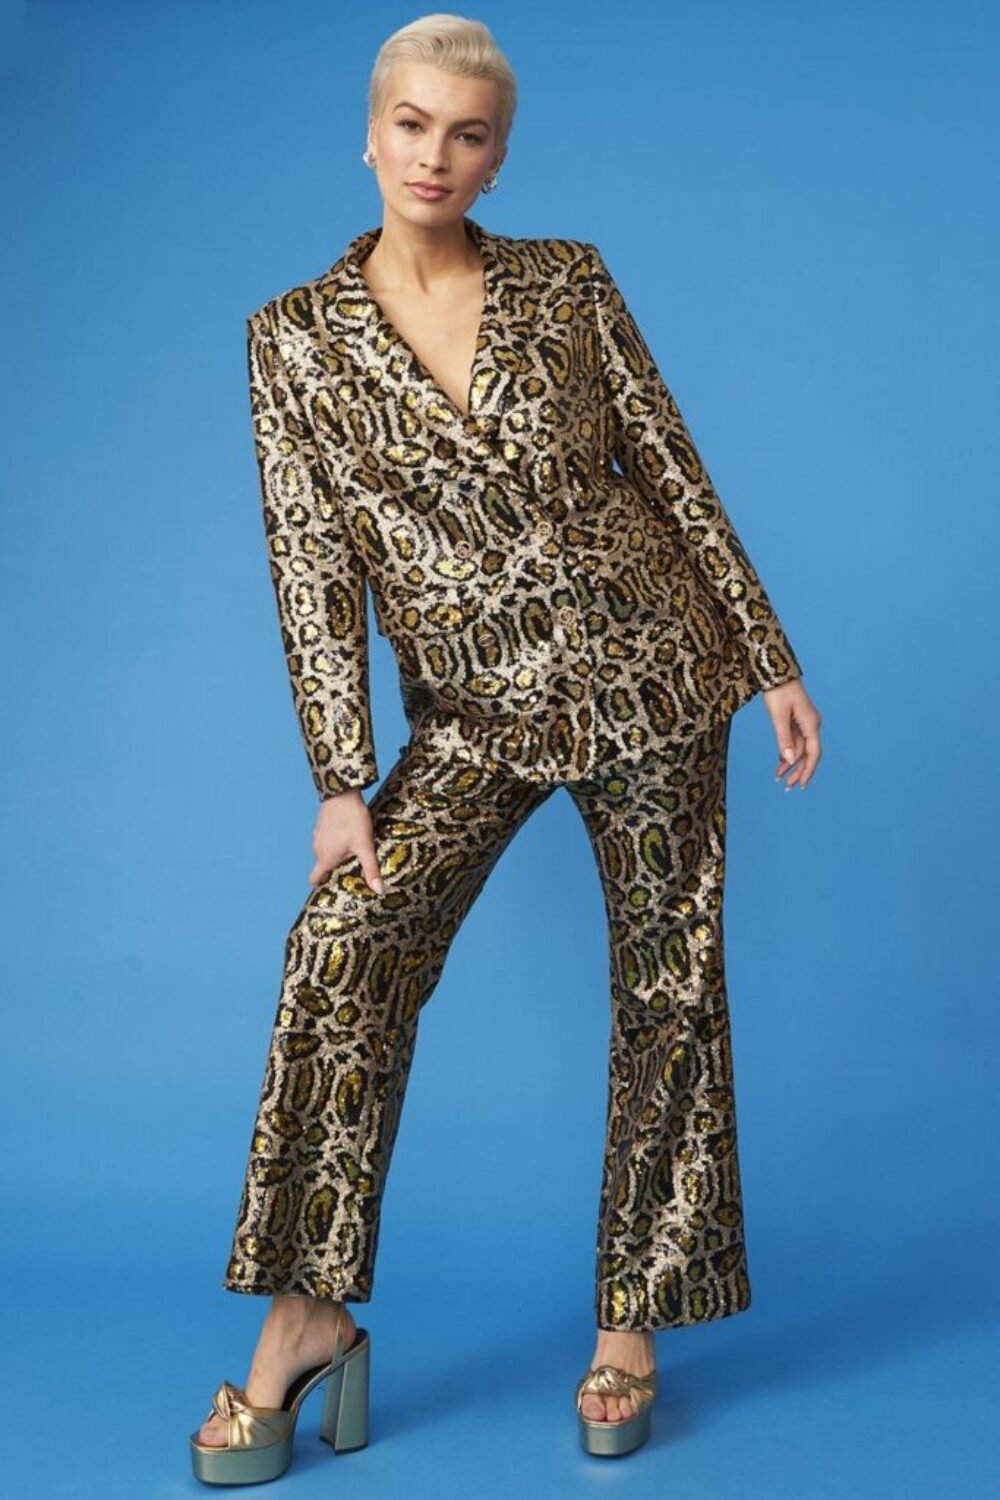 Shop Gold Animal Print Sequin Trousers and women's luxury and designer clothes at www.lux-apparel.co.uk